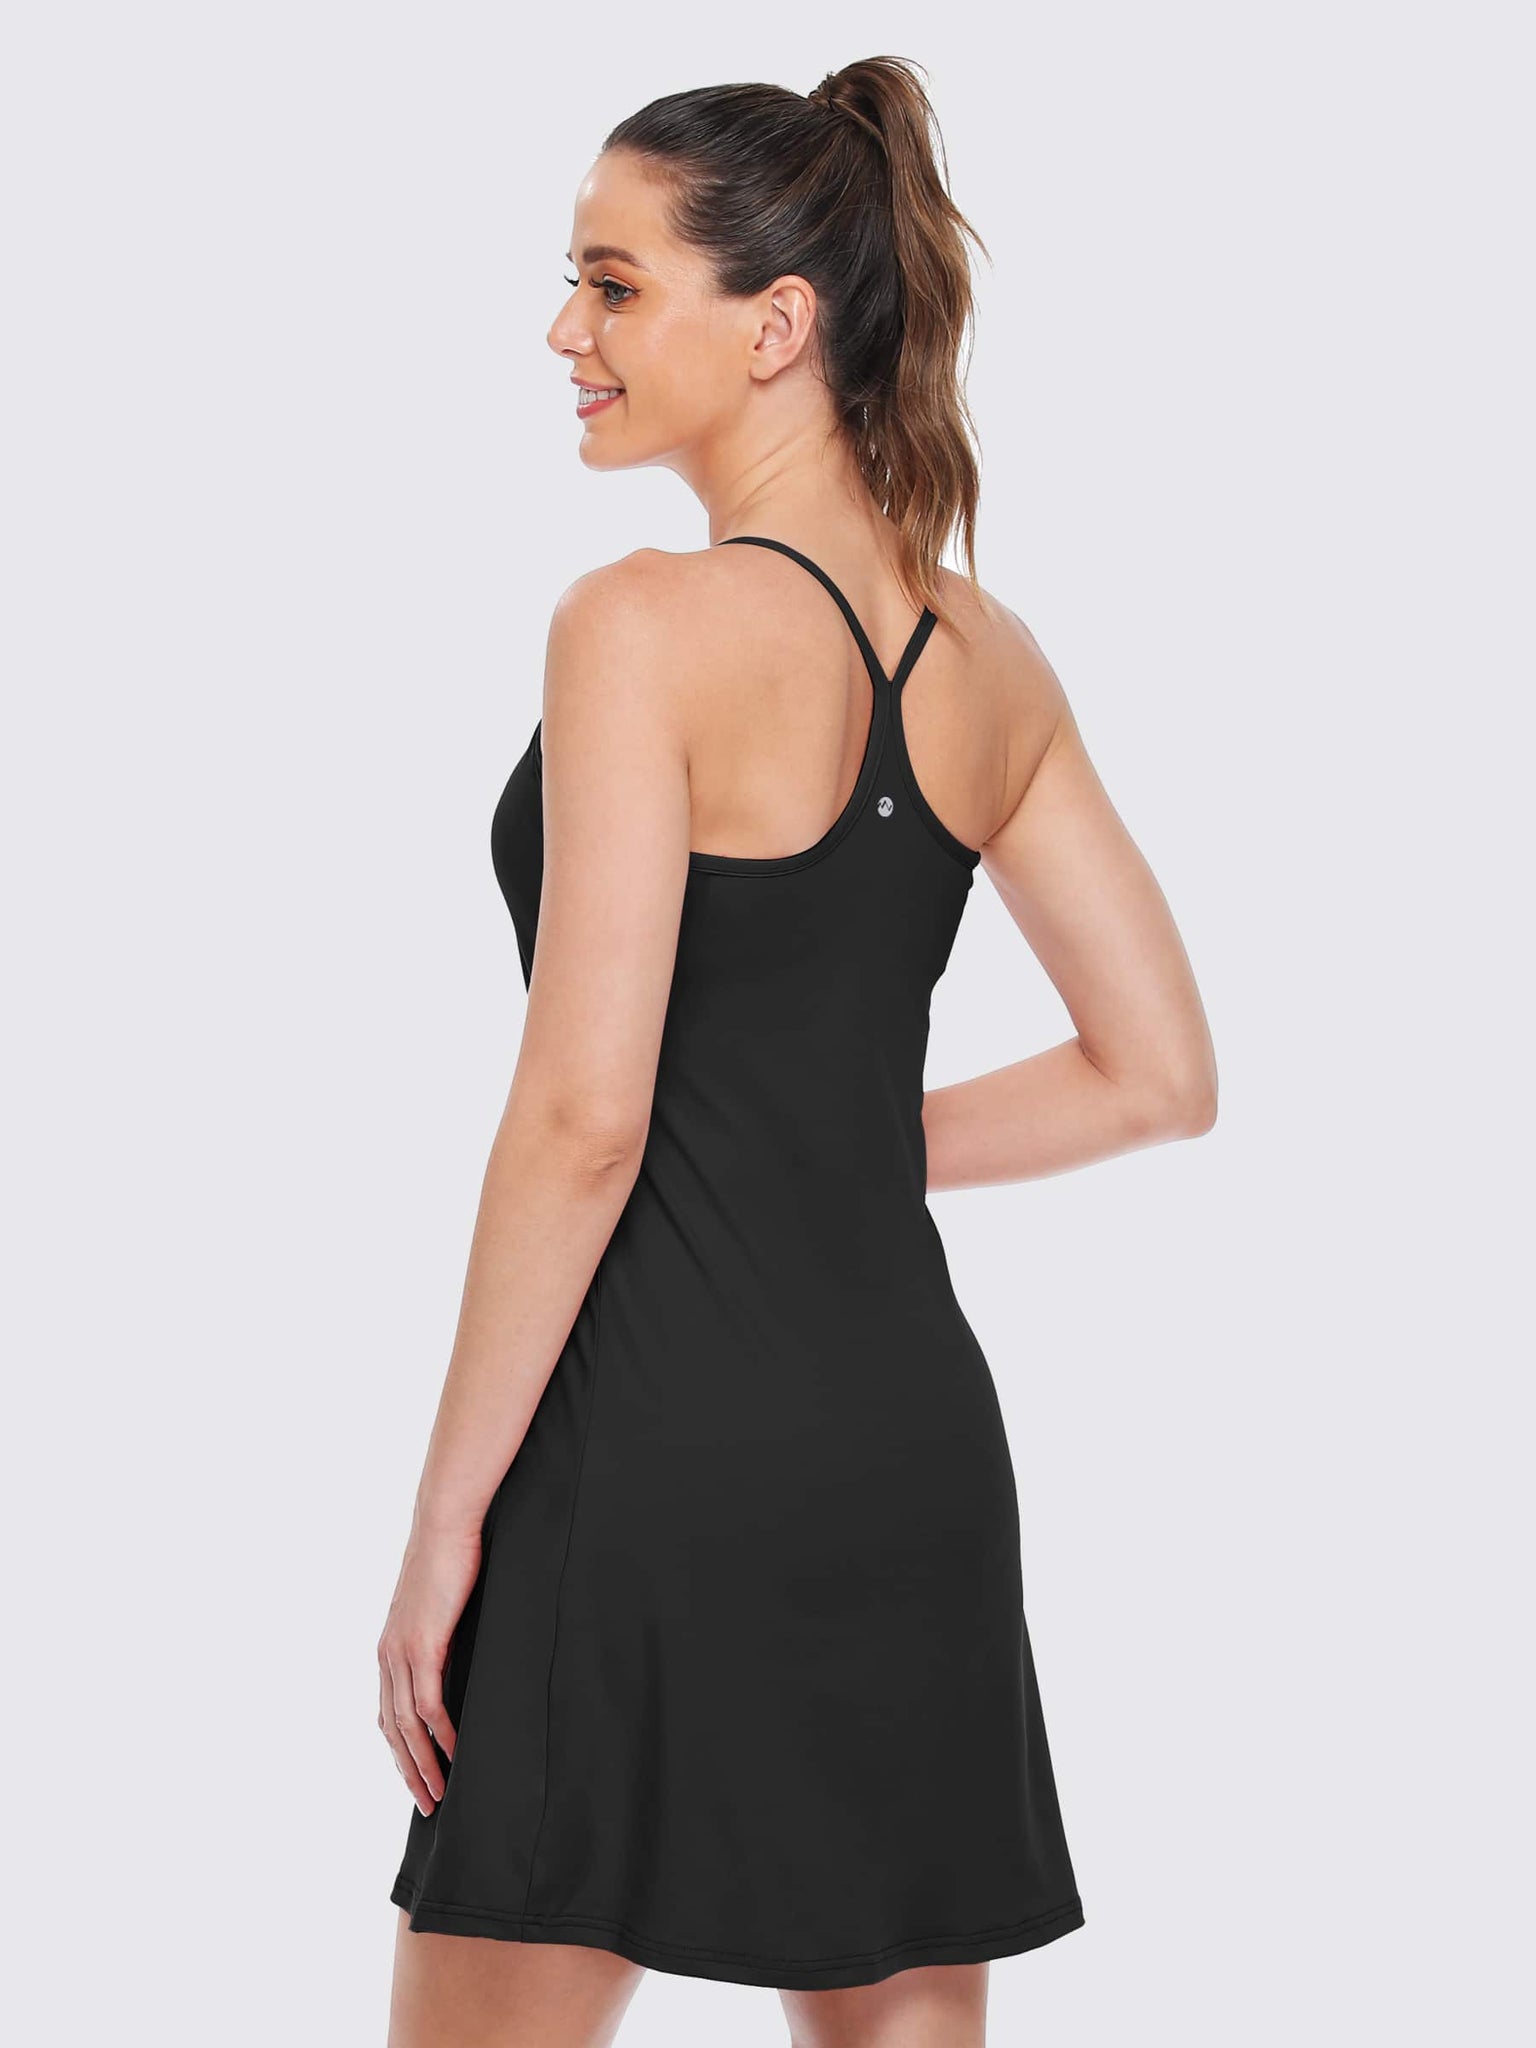 Women's Exercise Dress with Detachable Shorts